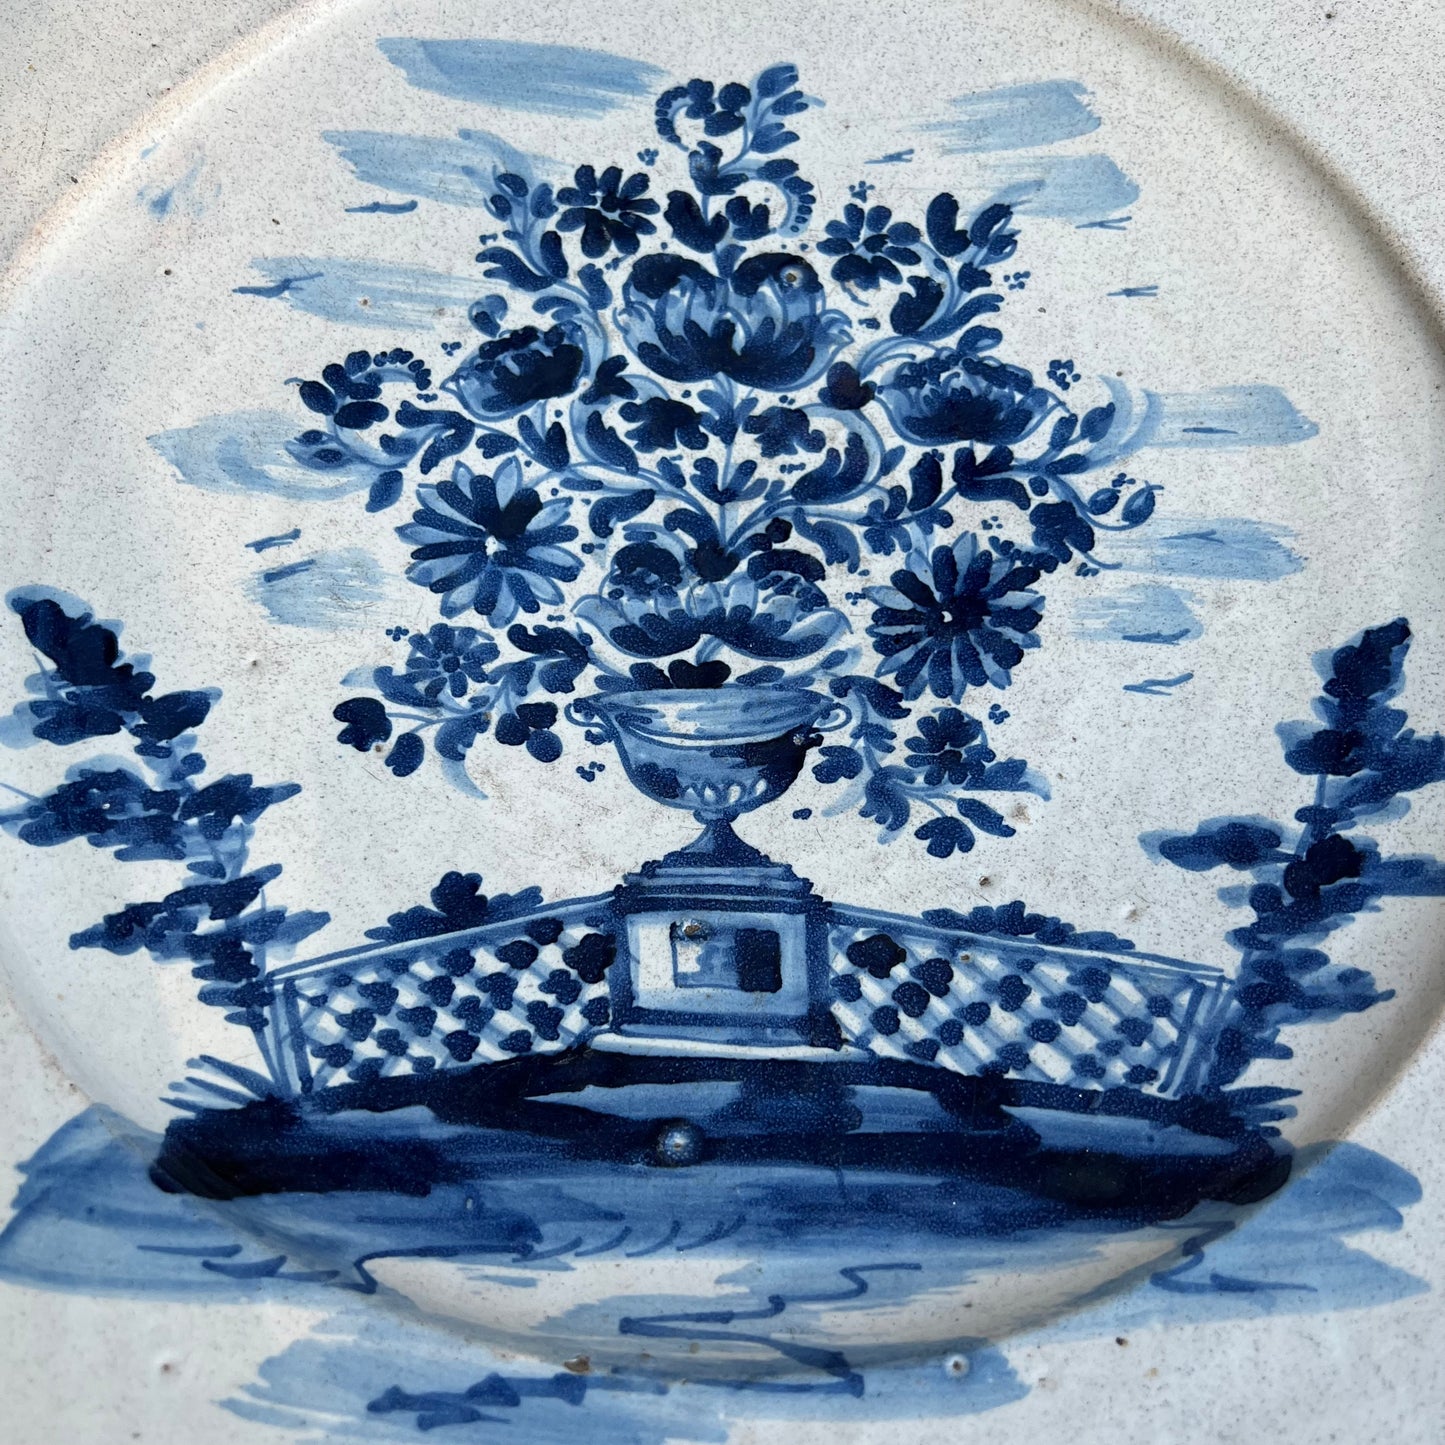 Large 18th Century Blue & White Delft Charger c.1780